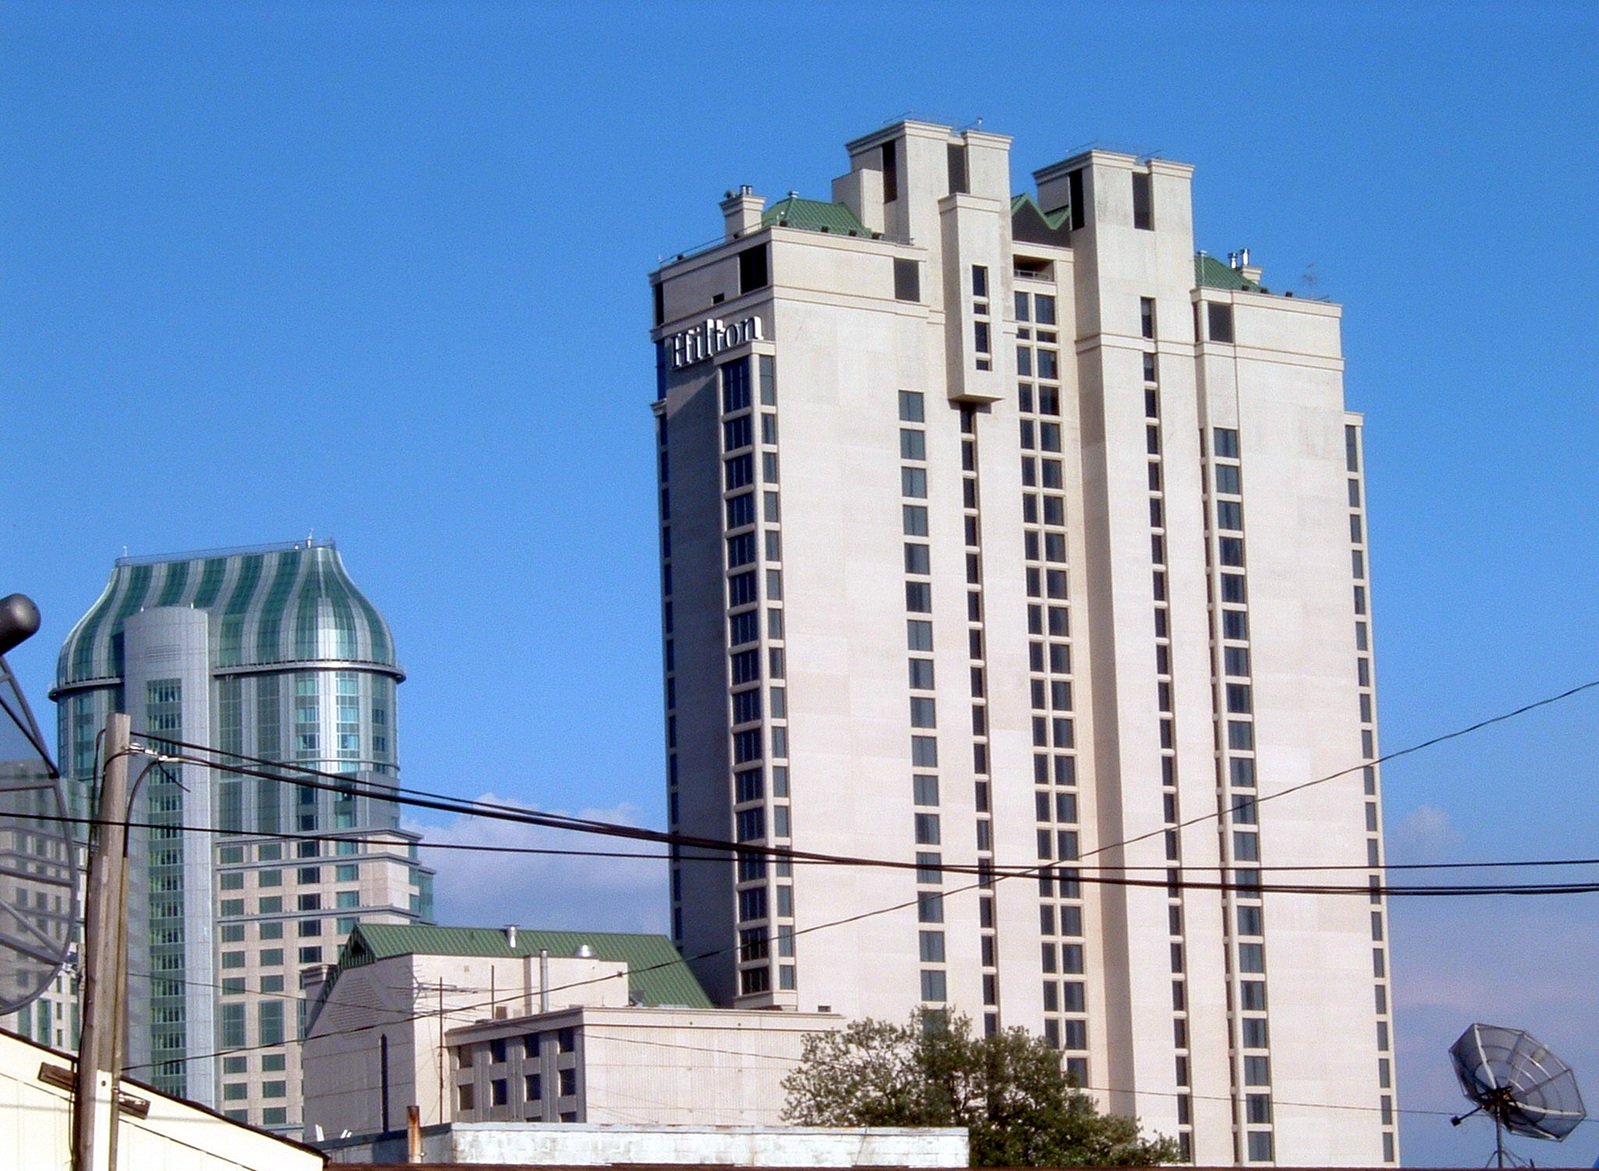 this large high rise building is located near other buildings